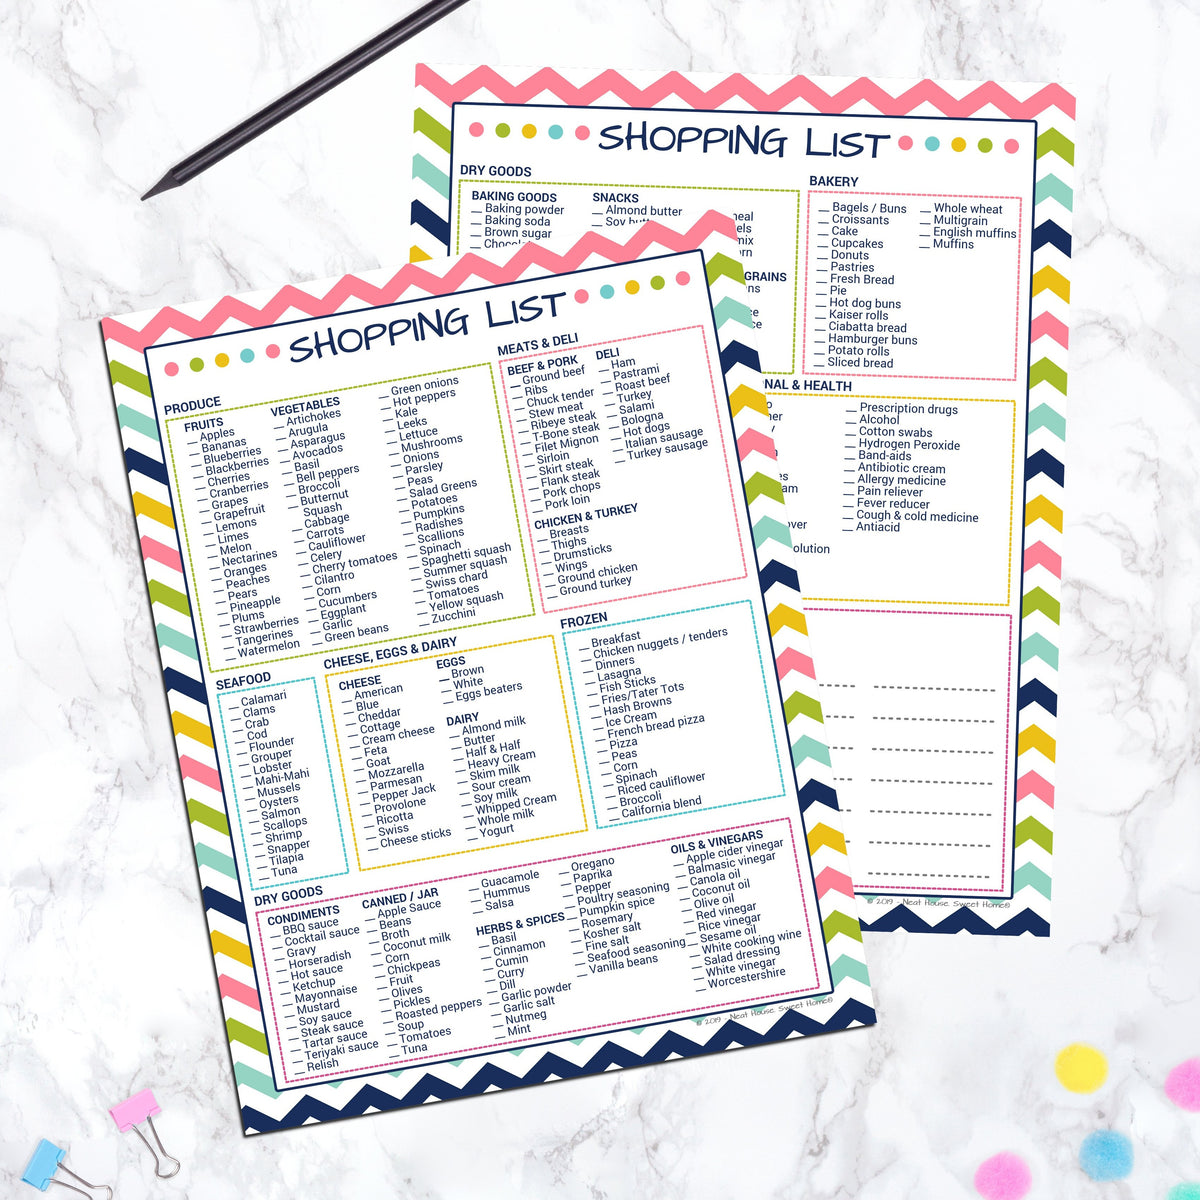 Shopping List Template - Grocery Store Checklist - Neat ...